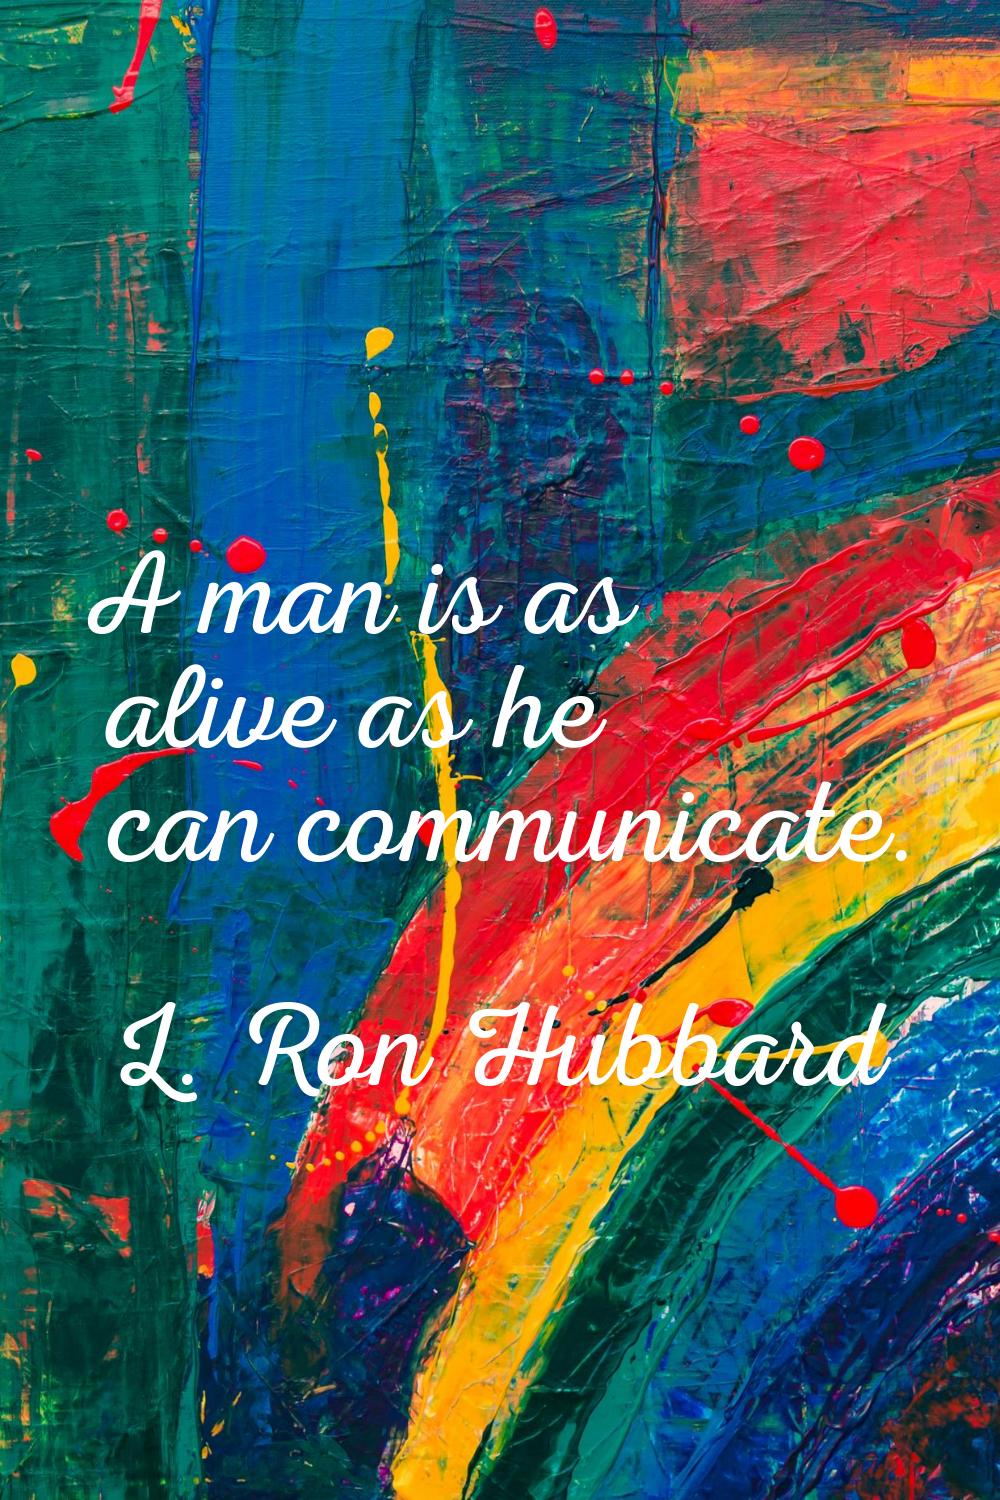 A man is as alive as he can communicate.